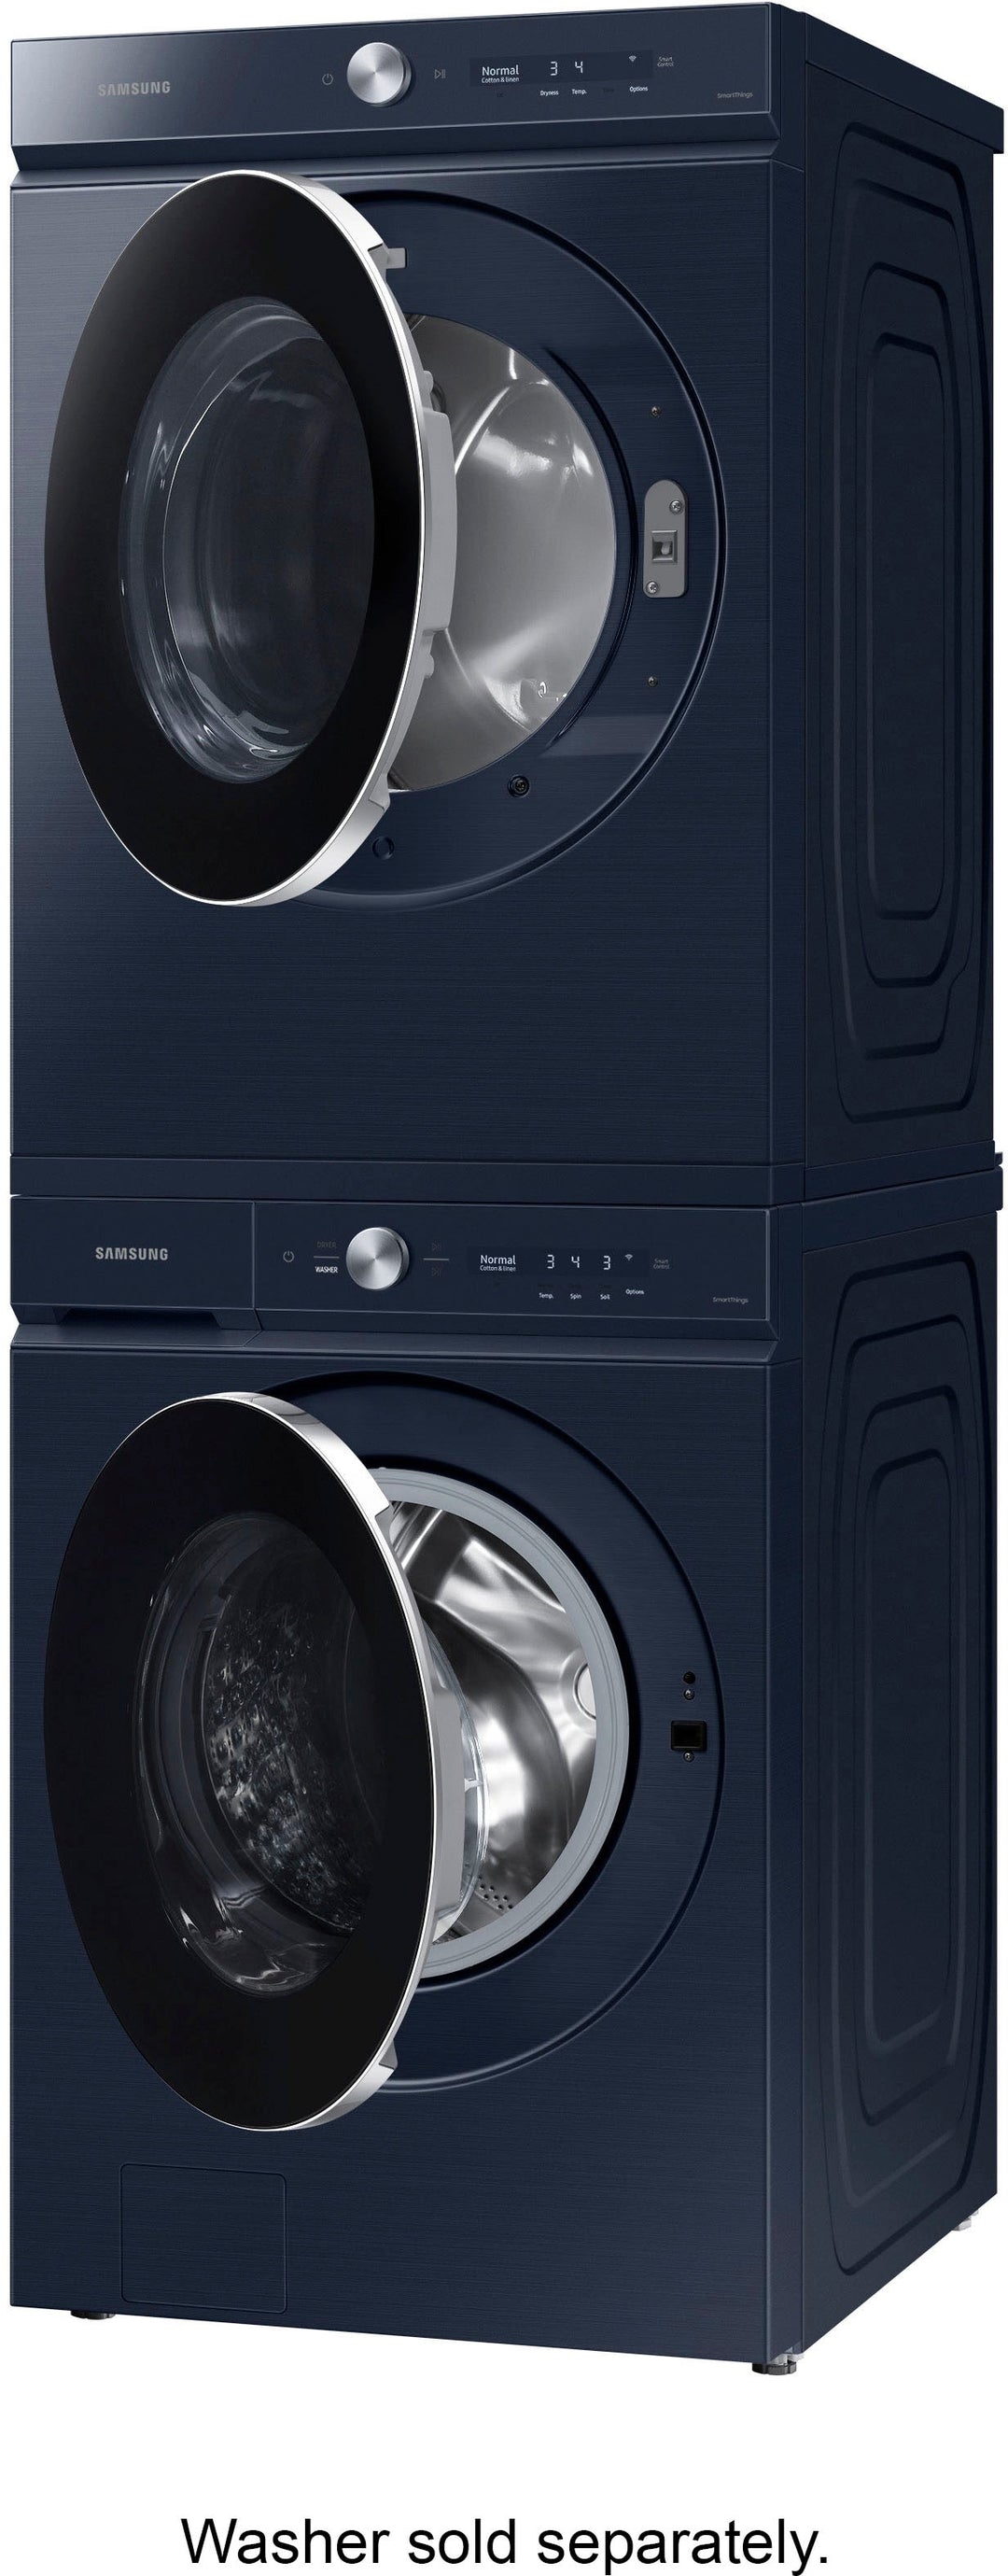 Samsung - Bespoke 7.6 cu. ft. Ultra Capacity Electric Dryer with AI Optimal Dry and Super Speed Dry - Brushed navy_8